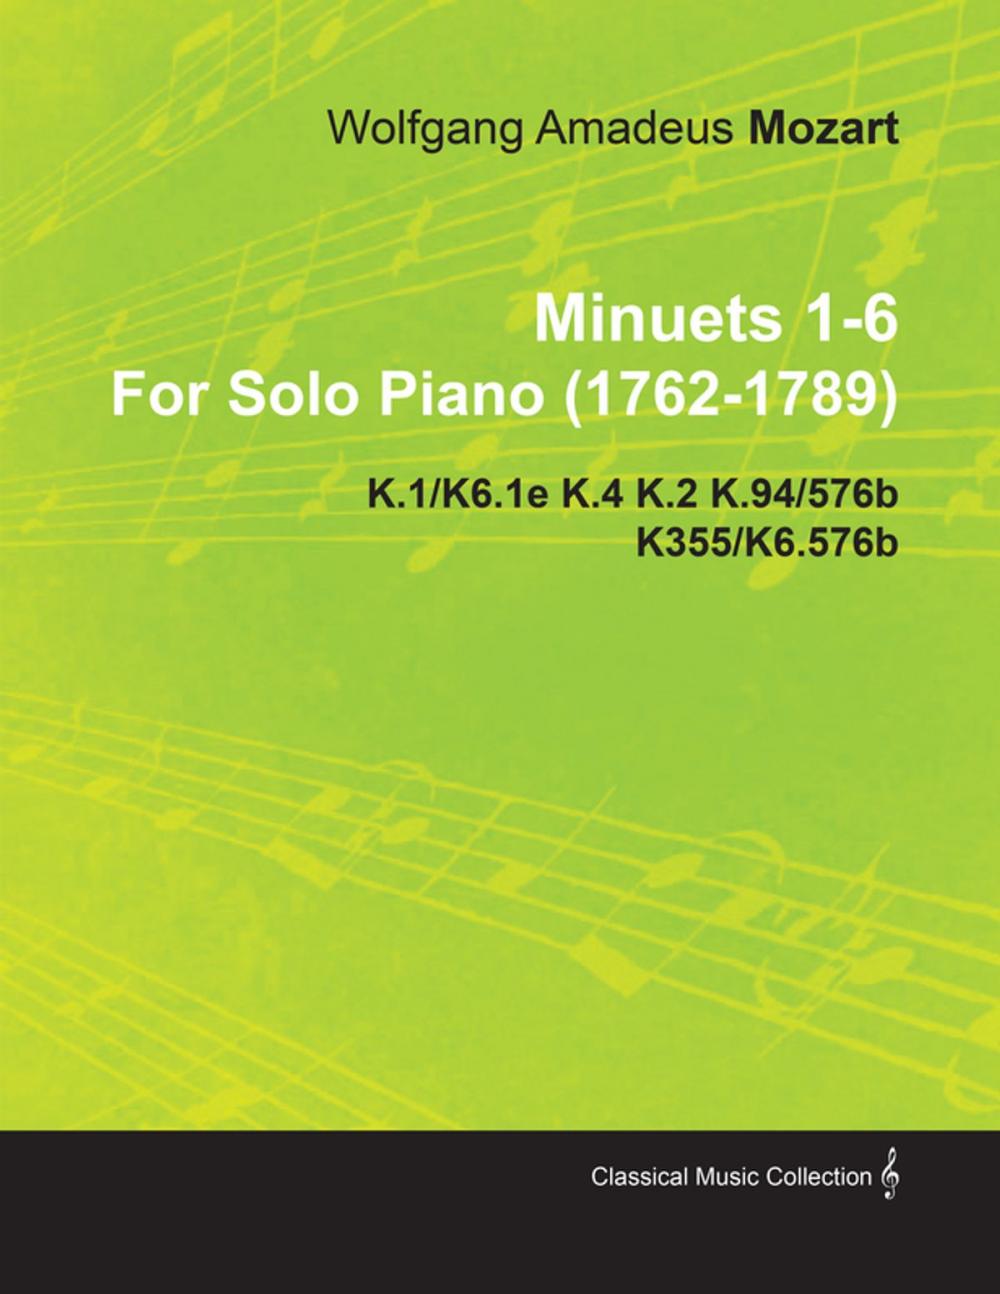 Big bigCover of Minuets 1-6 By Wolfgang Amadeus Mozart For Solo Piano (1762-1789) K.1/K6.1e K.4 K.2 K.94/576b K355/K6.576b